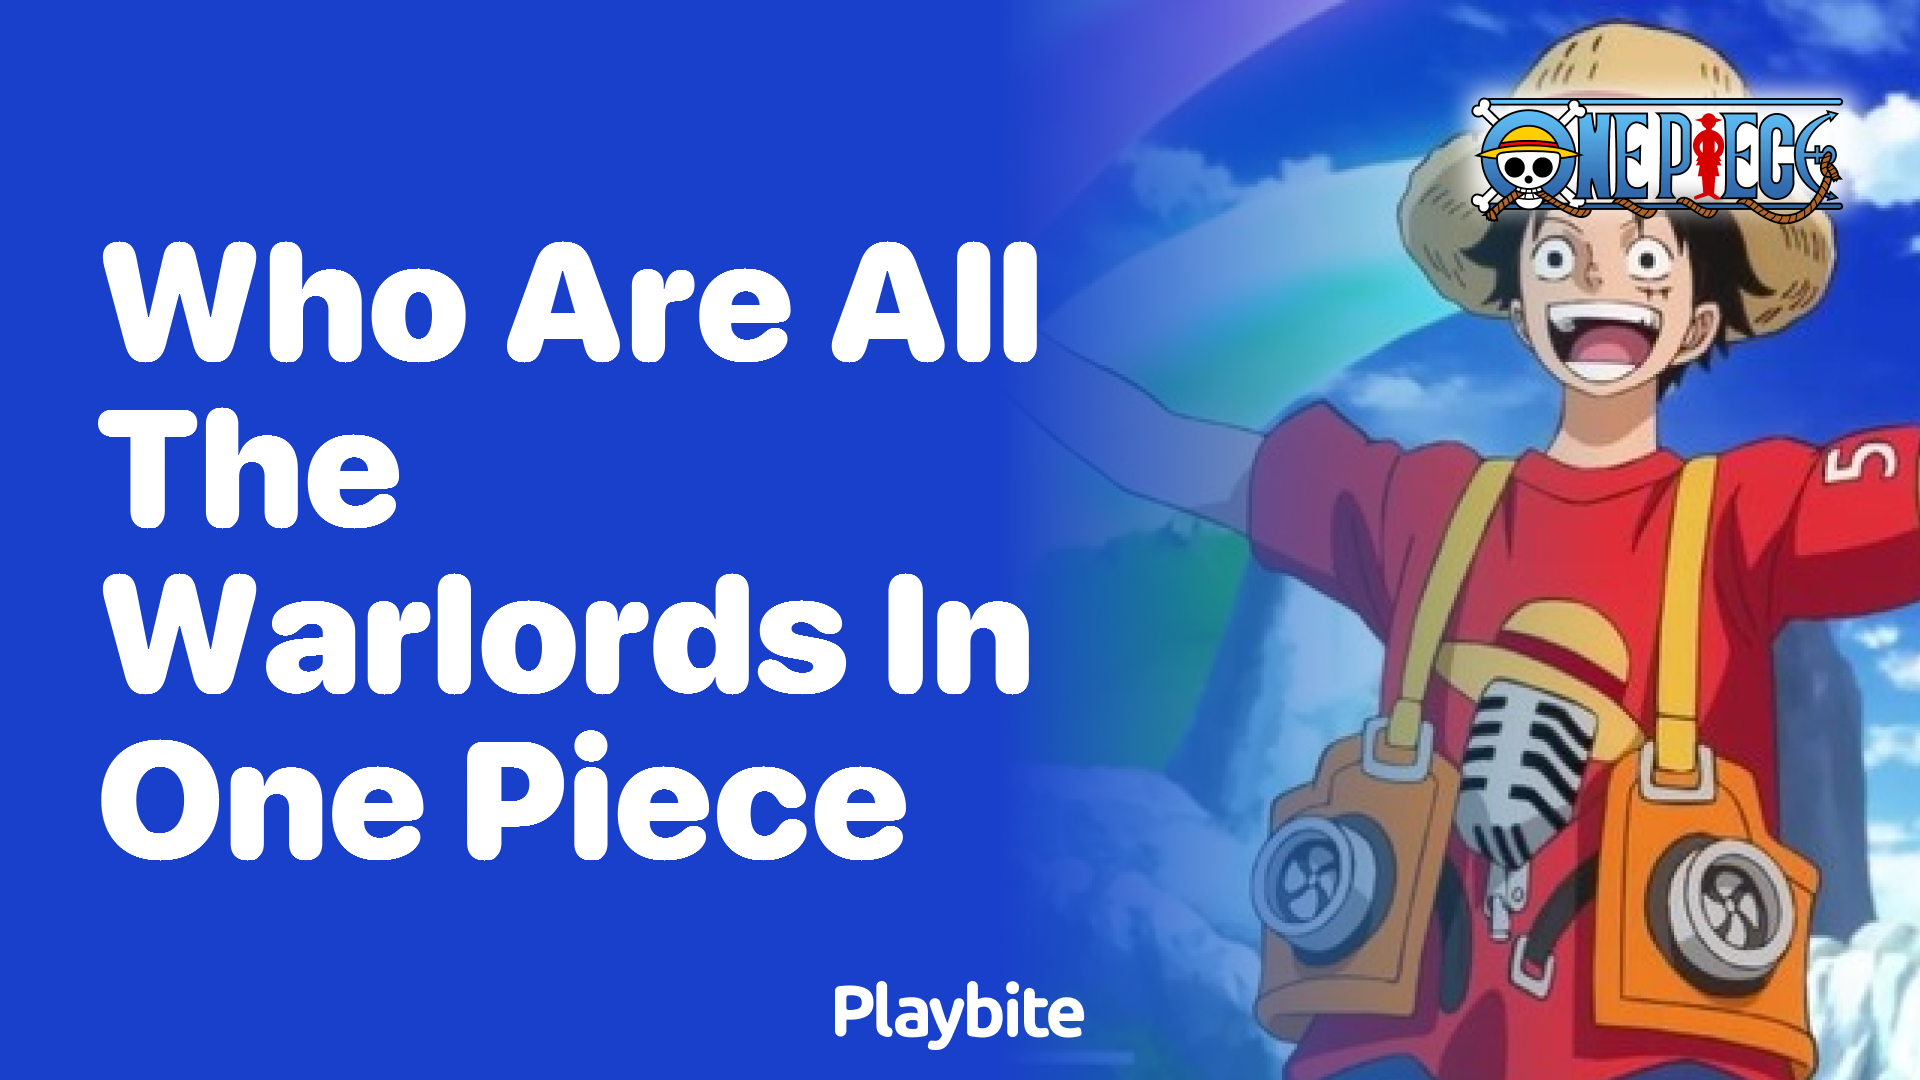 Who Are All the Warlords in One Piece?